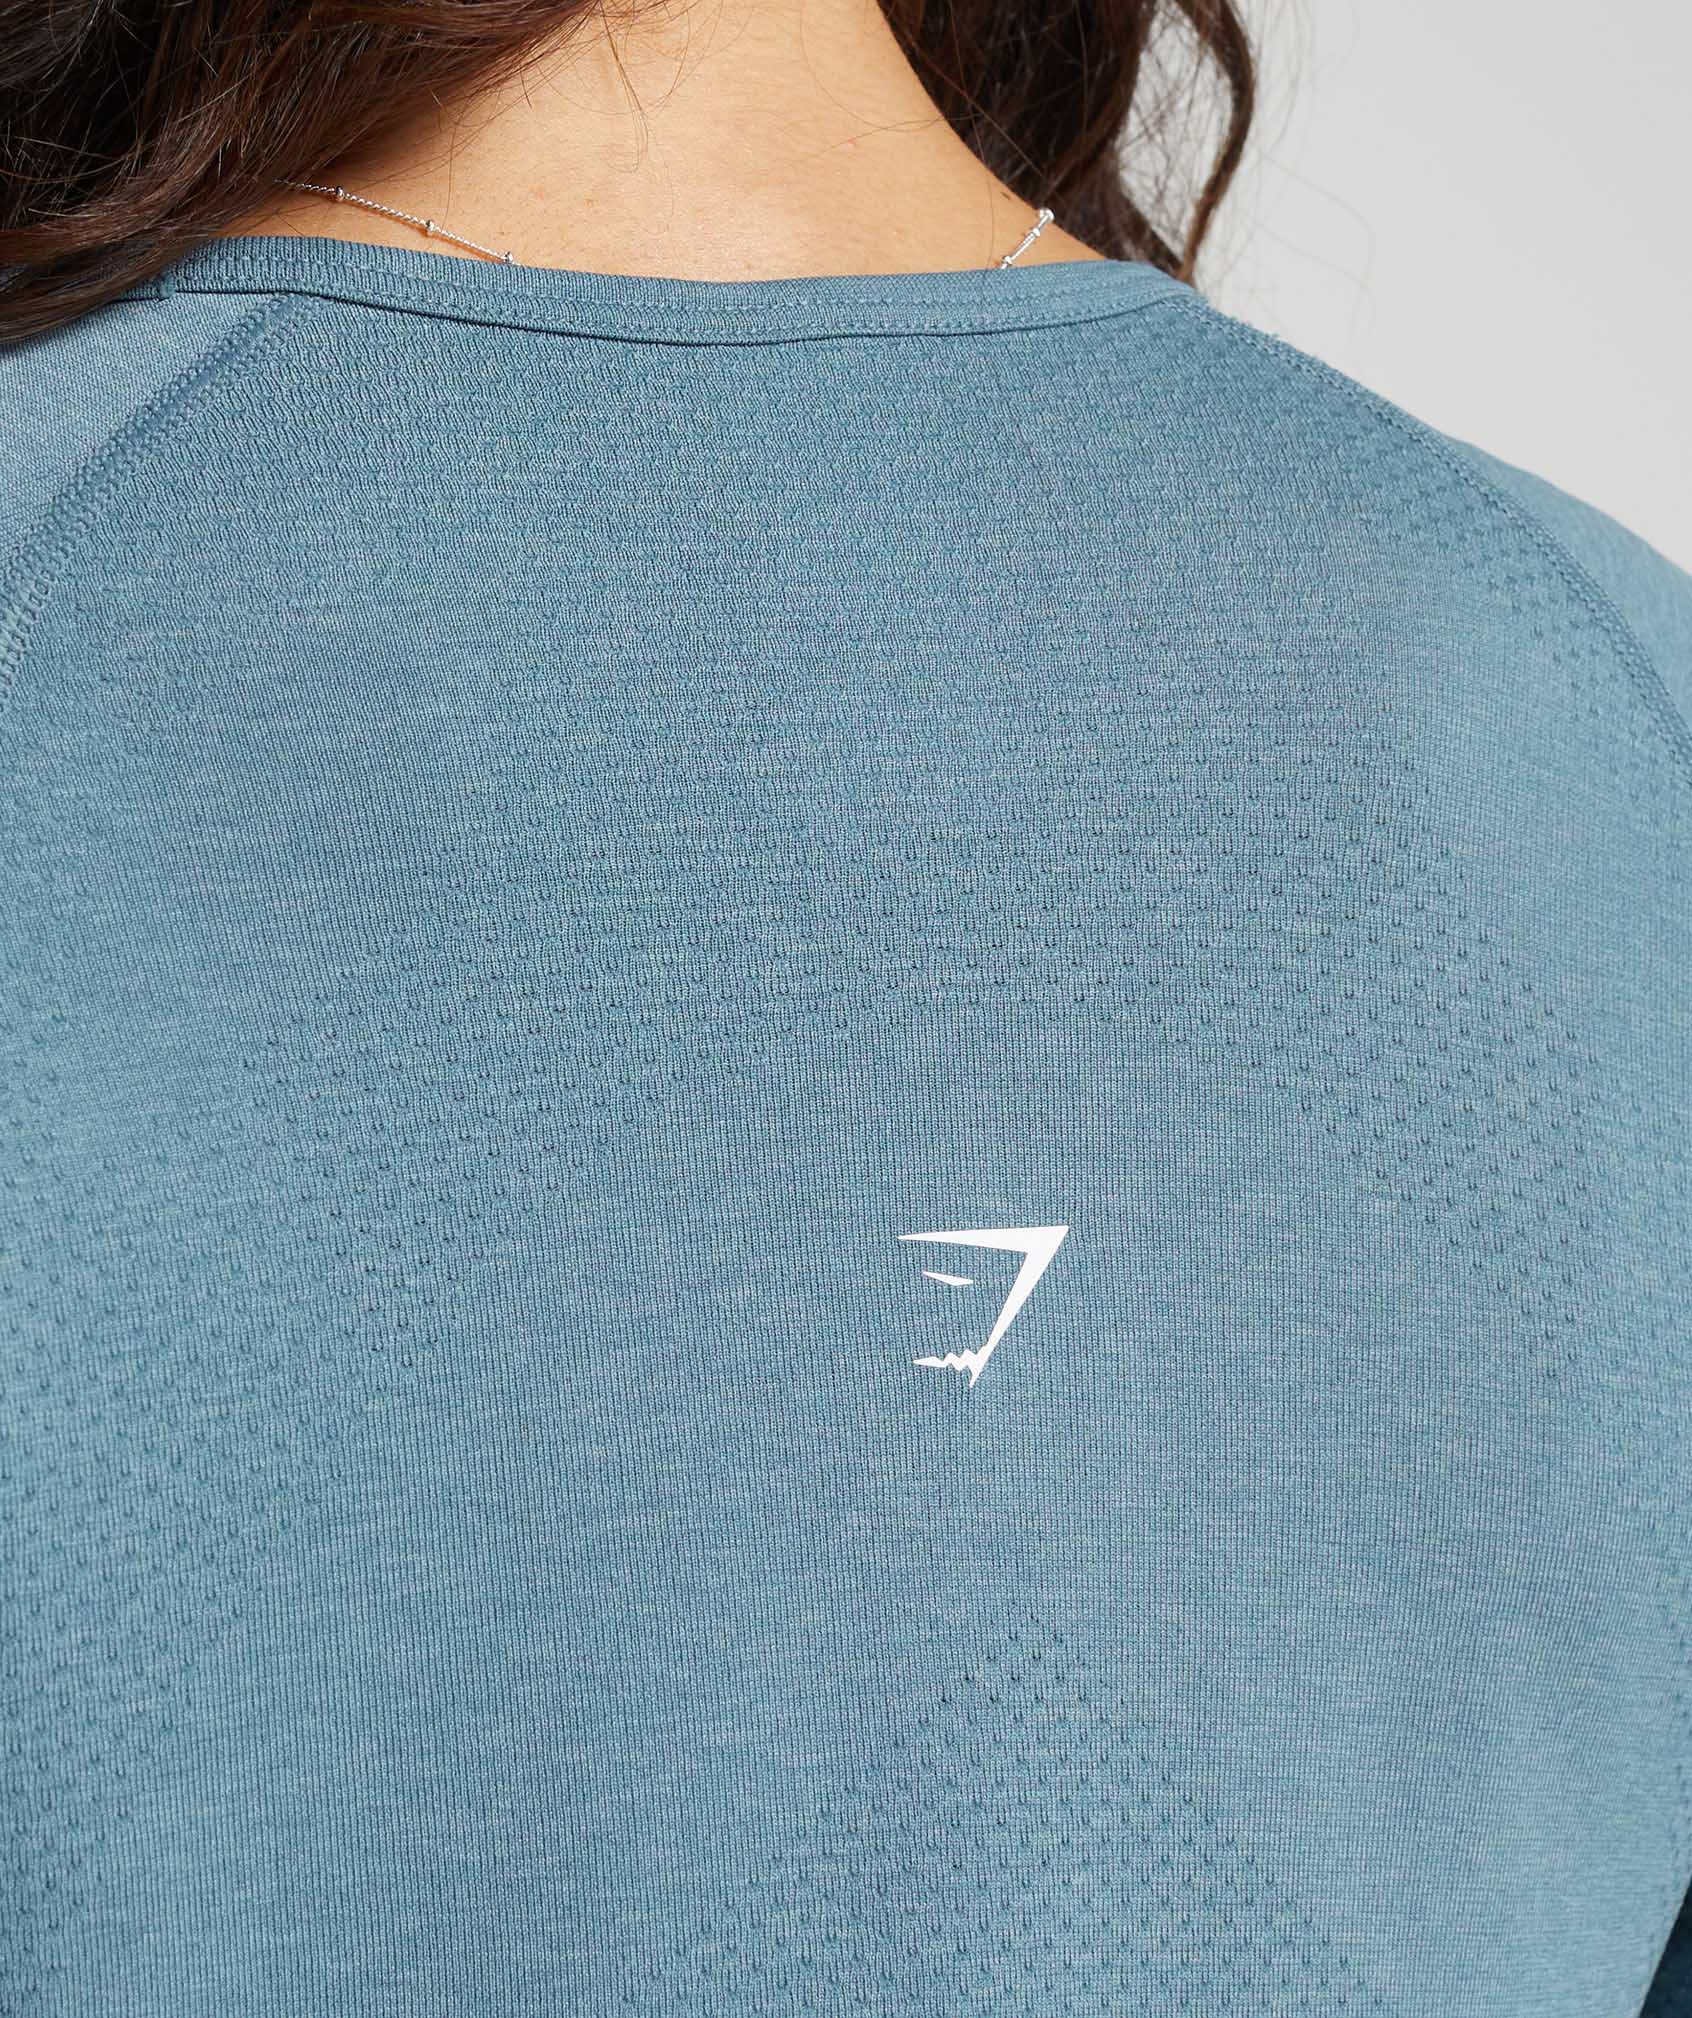 Vital Seamless 2.0 Light Long Sleeve Top in Faded Blue Marl - view 6